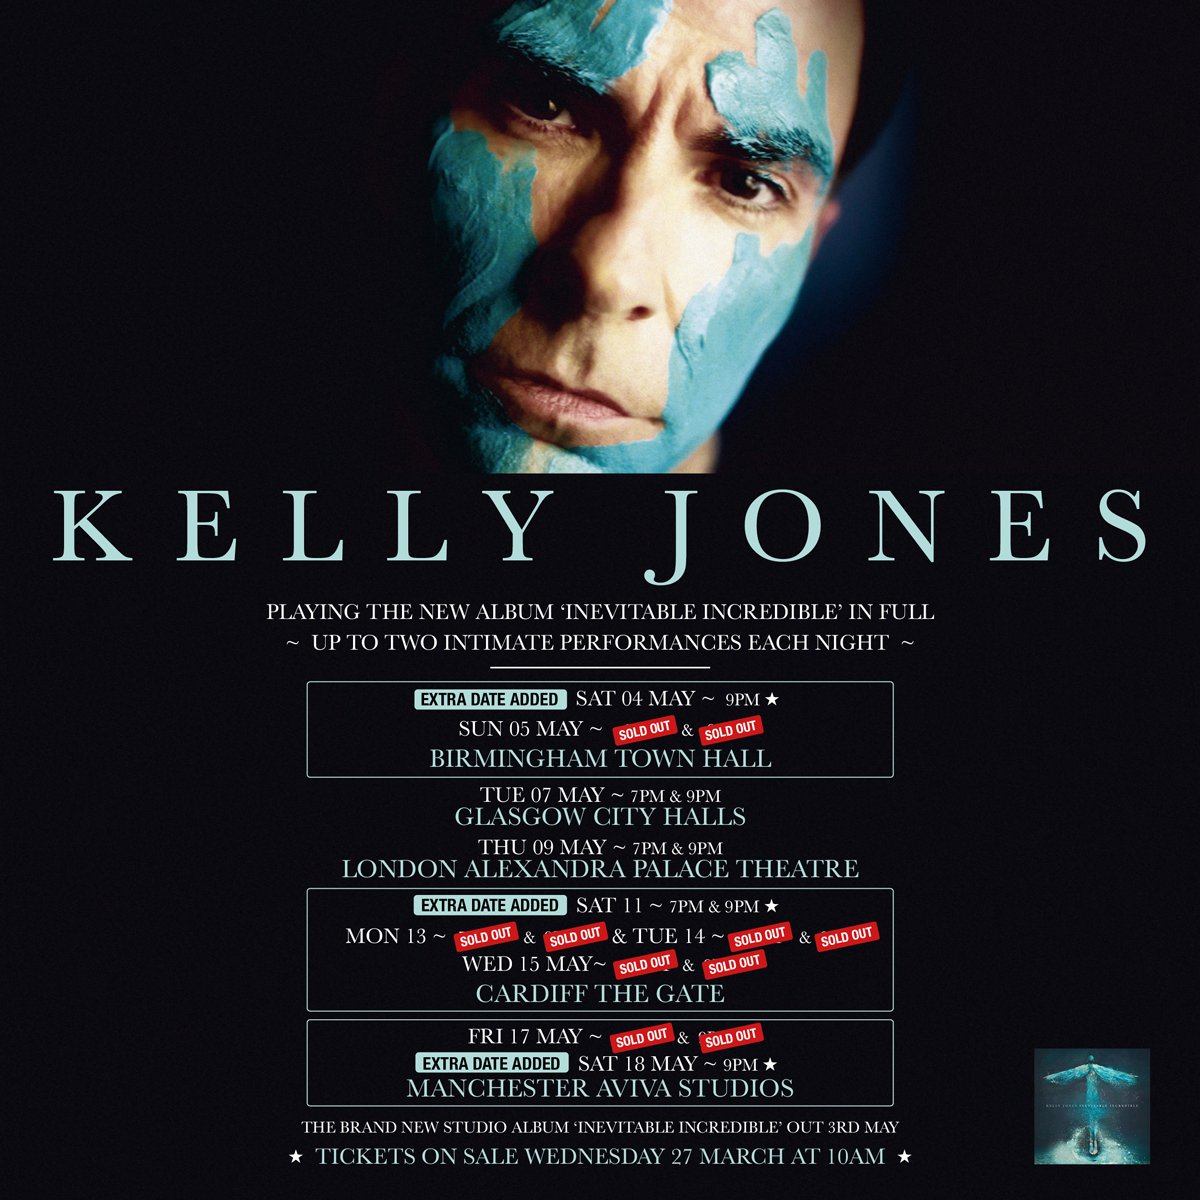 Pleased to announce due to overwhelming demand, 3 extra dates for Kelly’s ‘Inevitable Incredible’ tour 💥 4 May | 9pm - Birmingham 11 May | 7pm & 9pm - Cardiff 18 May | 9pm - Manchester Tickets will go on sale tomorrow (27 March) at 10am! - gigst.rs/KJ24